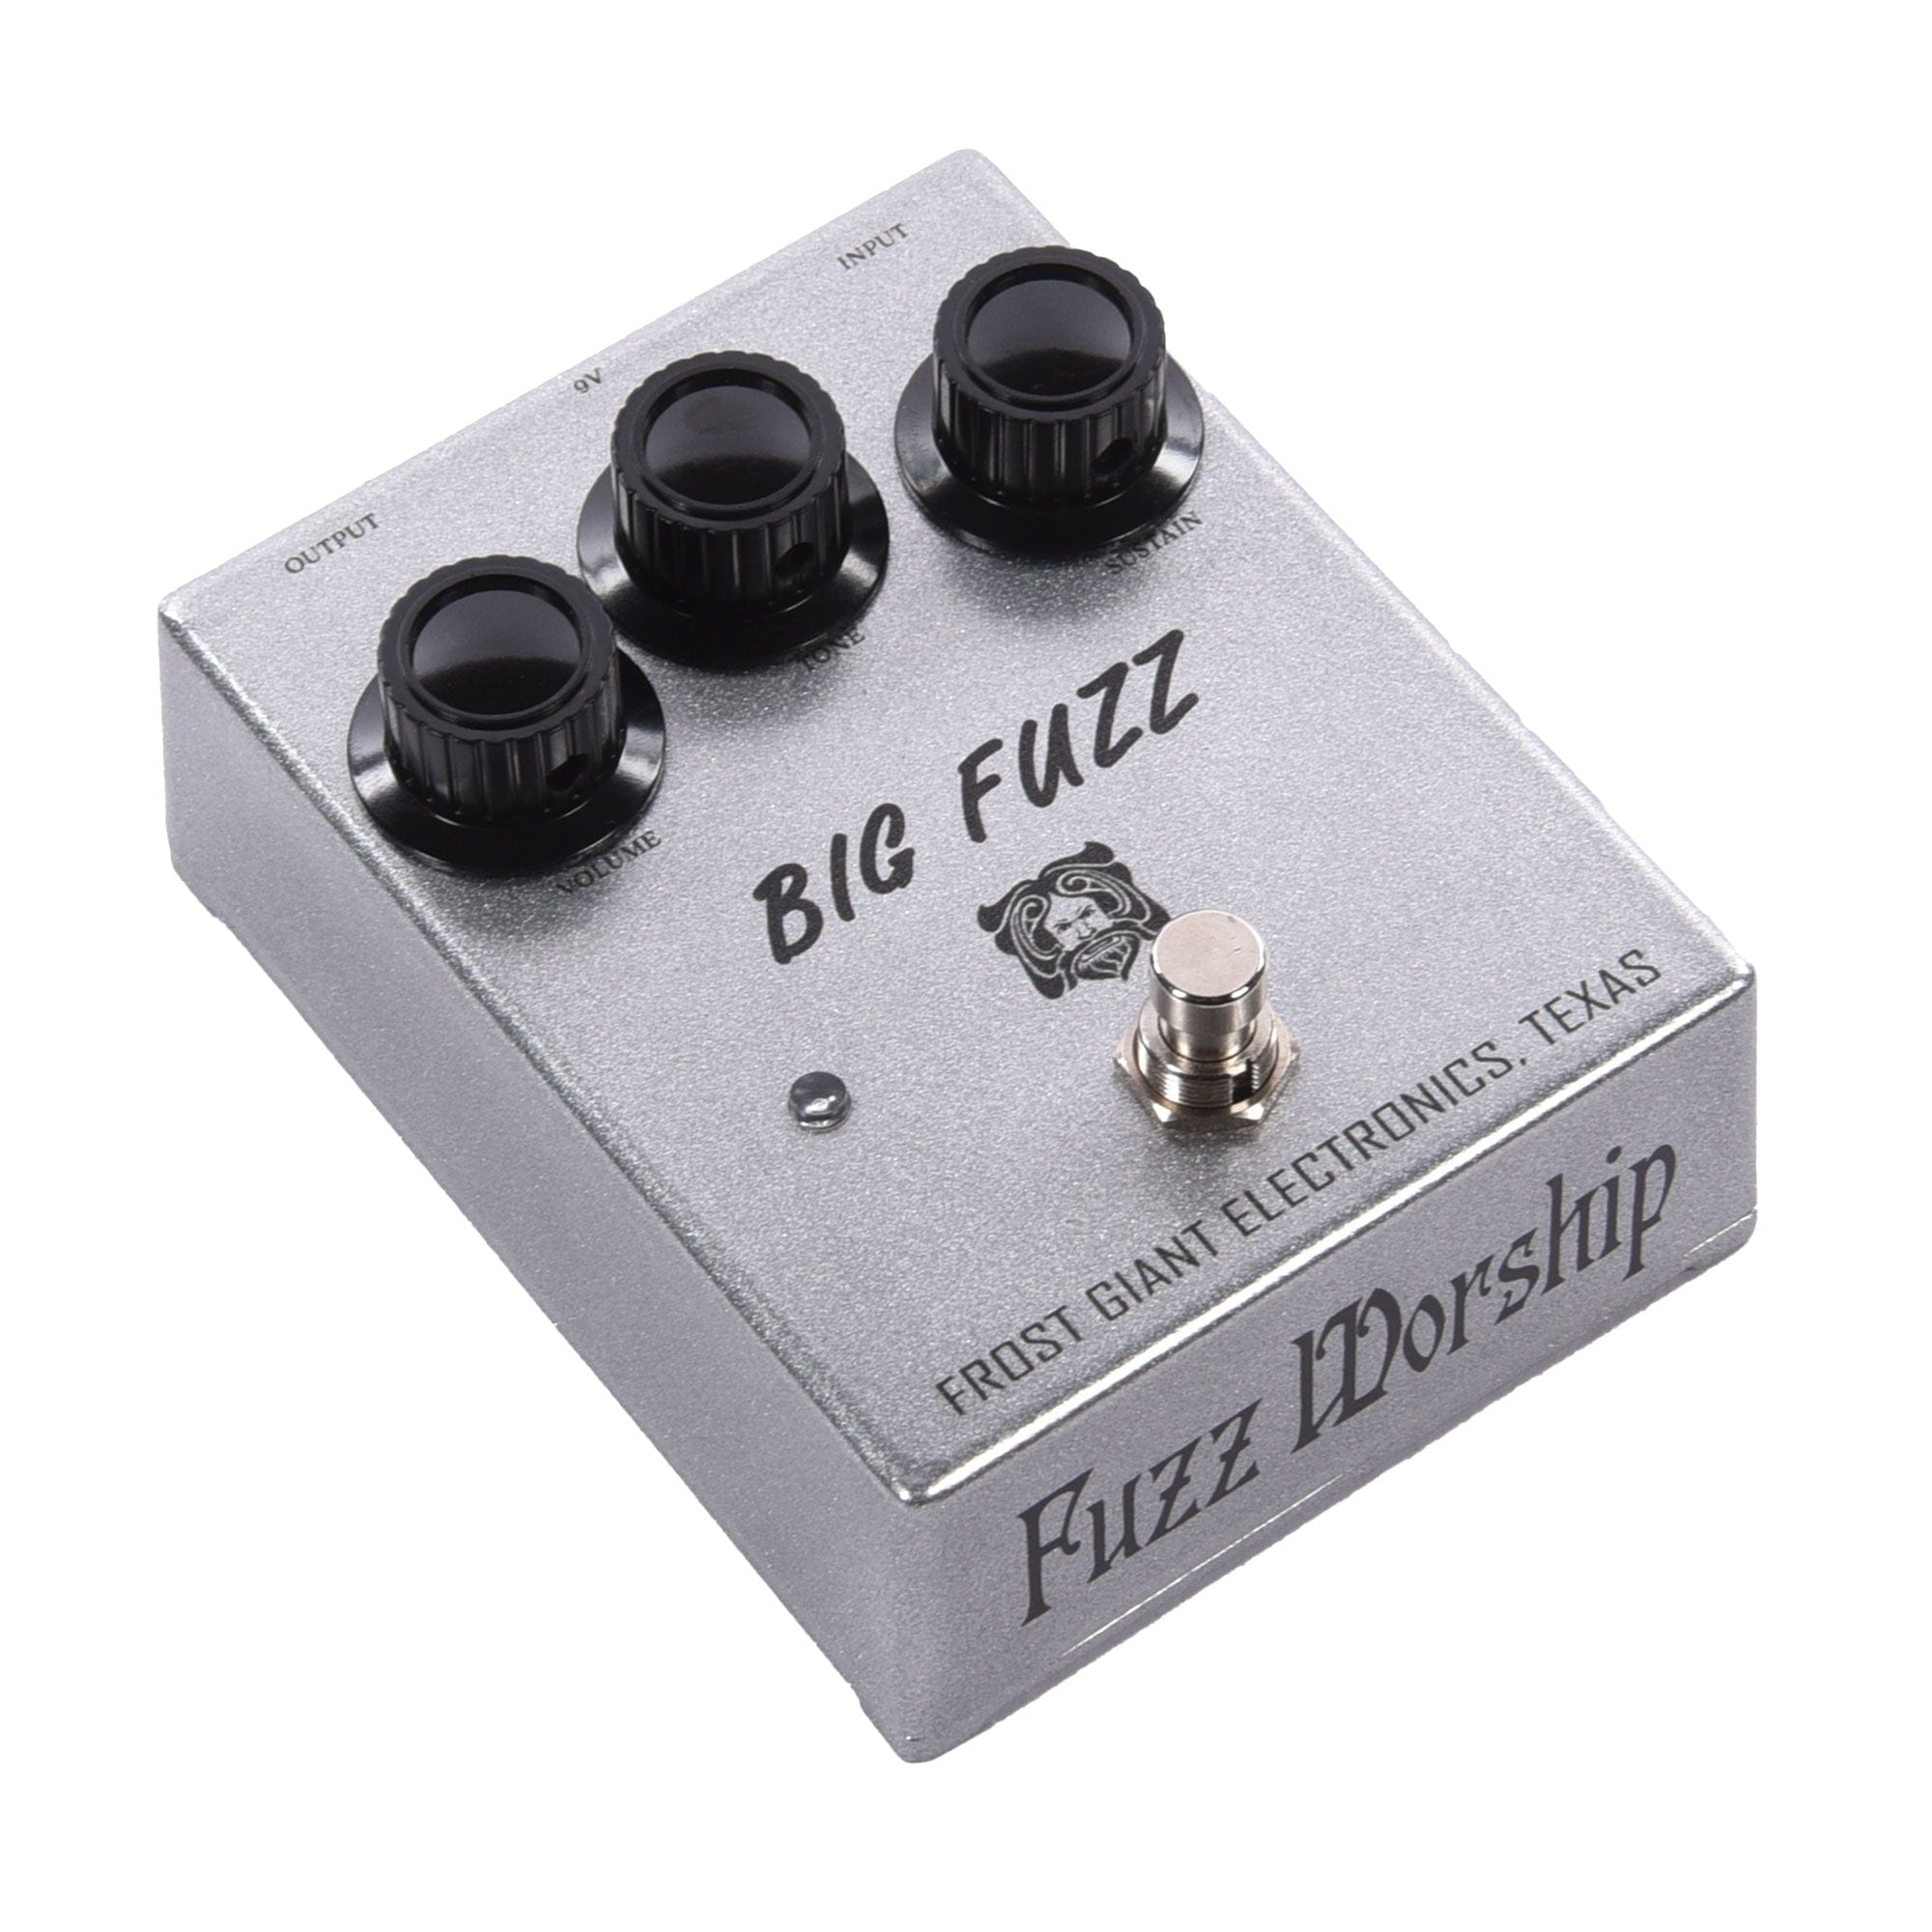 Frost Giant Special Run Big Fuzz Pedal V1 Triangle